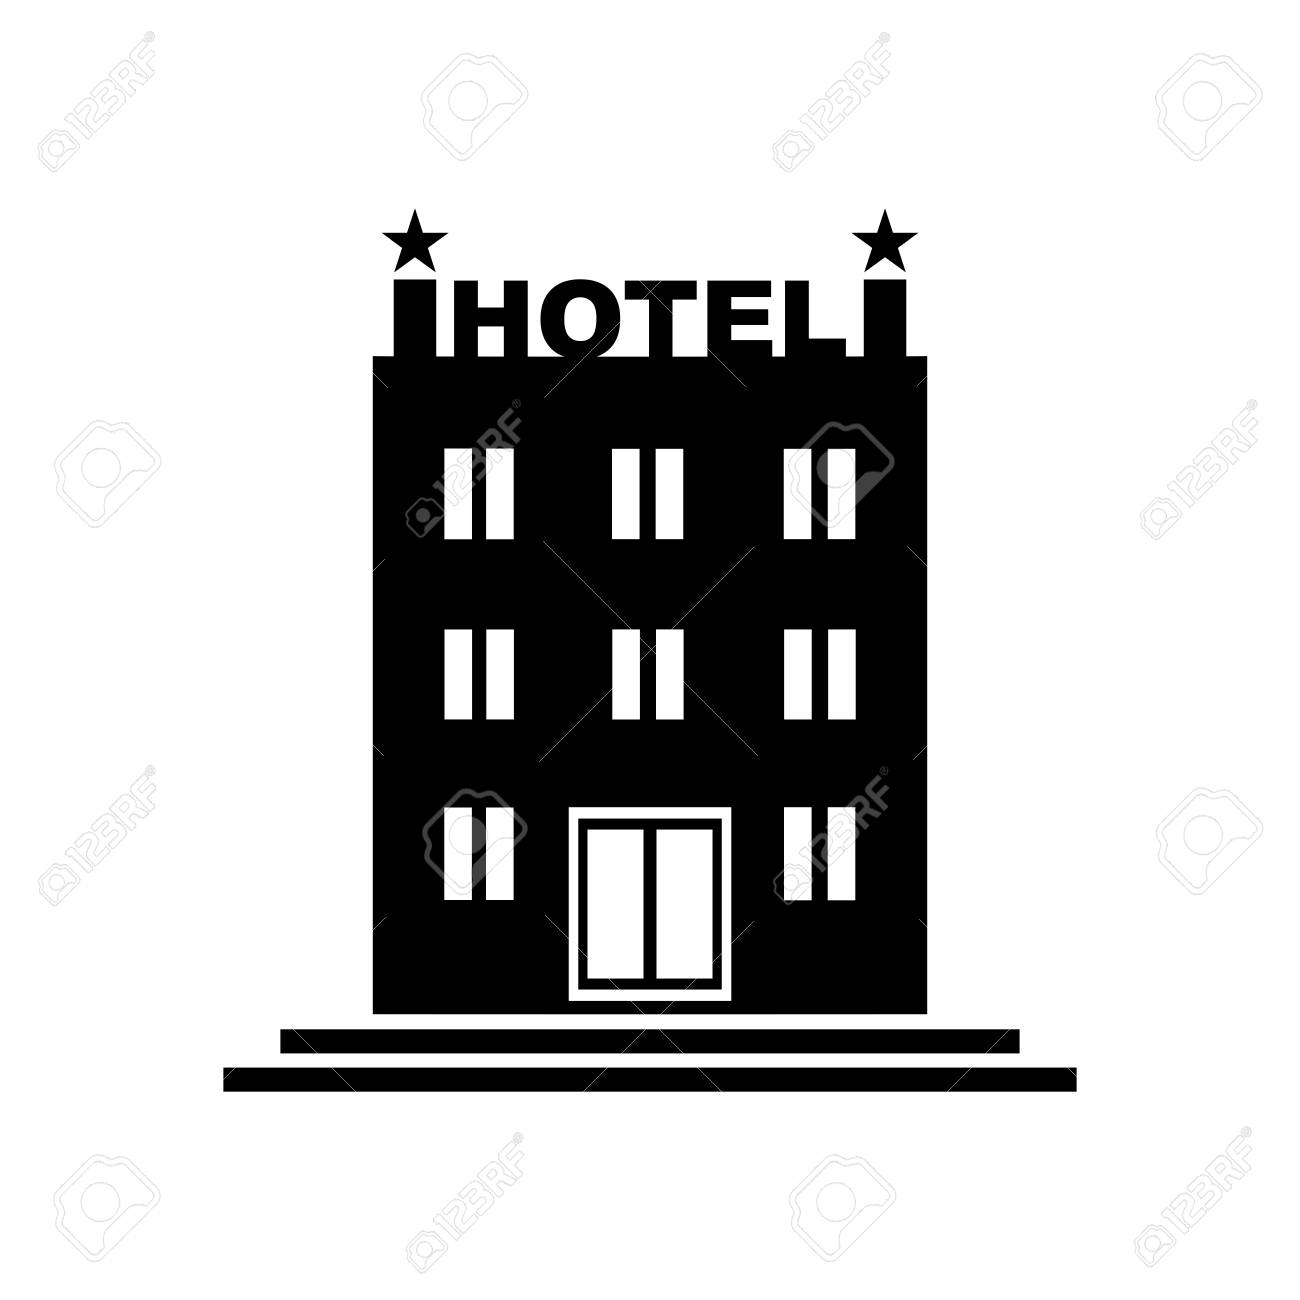 Hotel Clipart hotel building